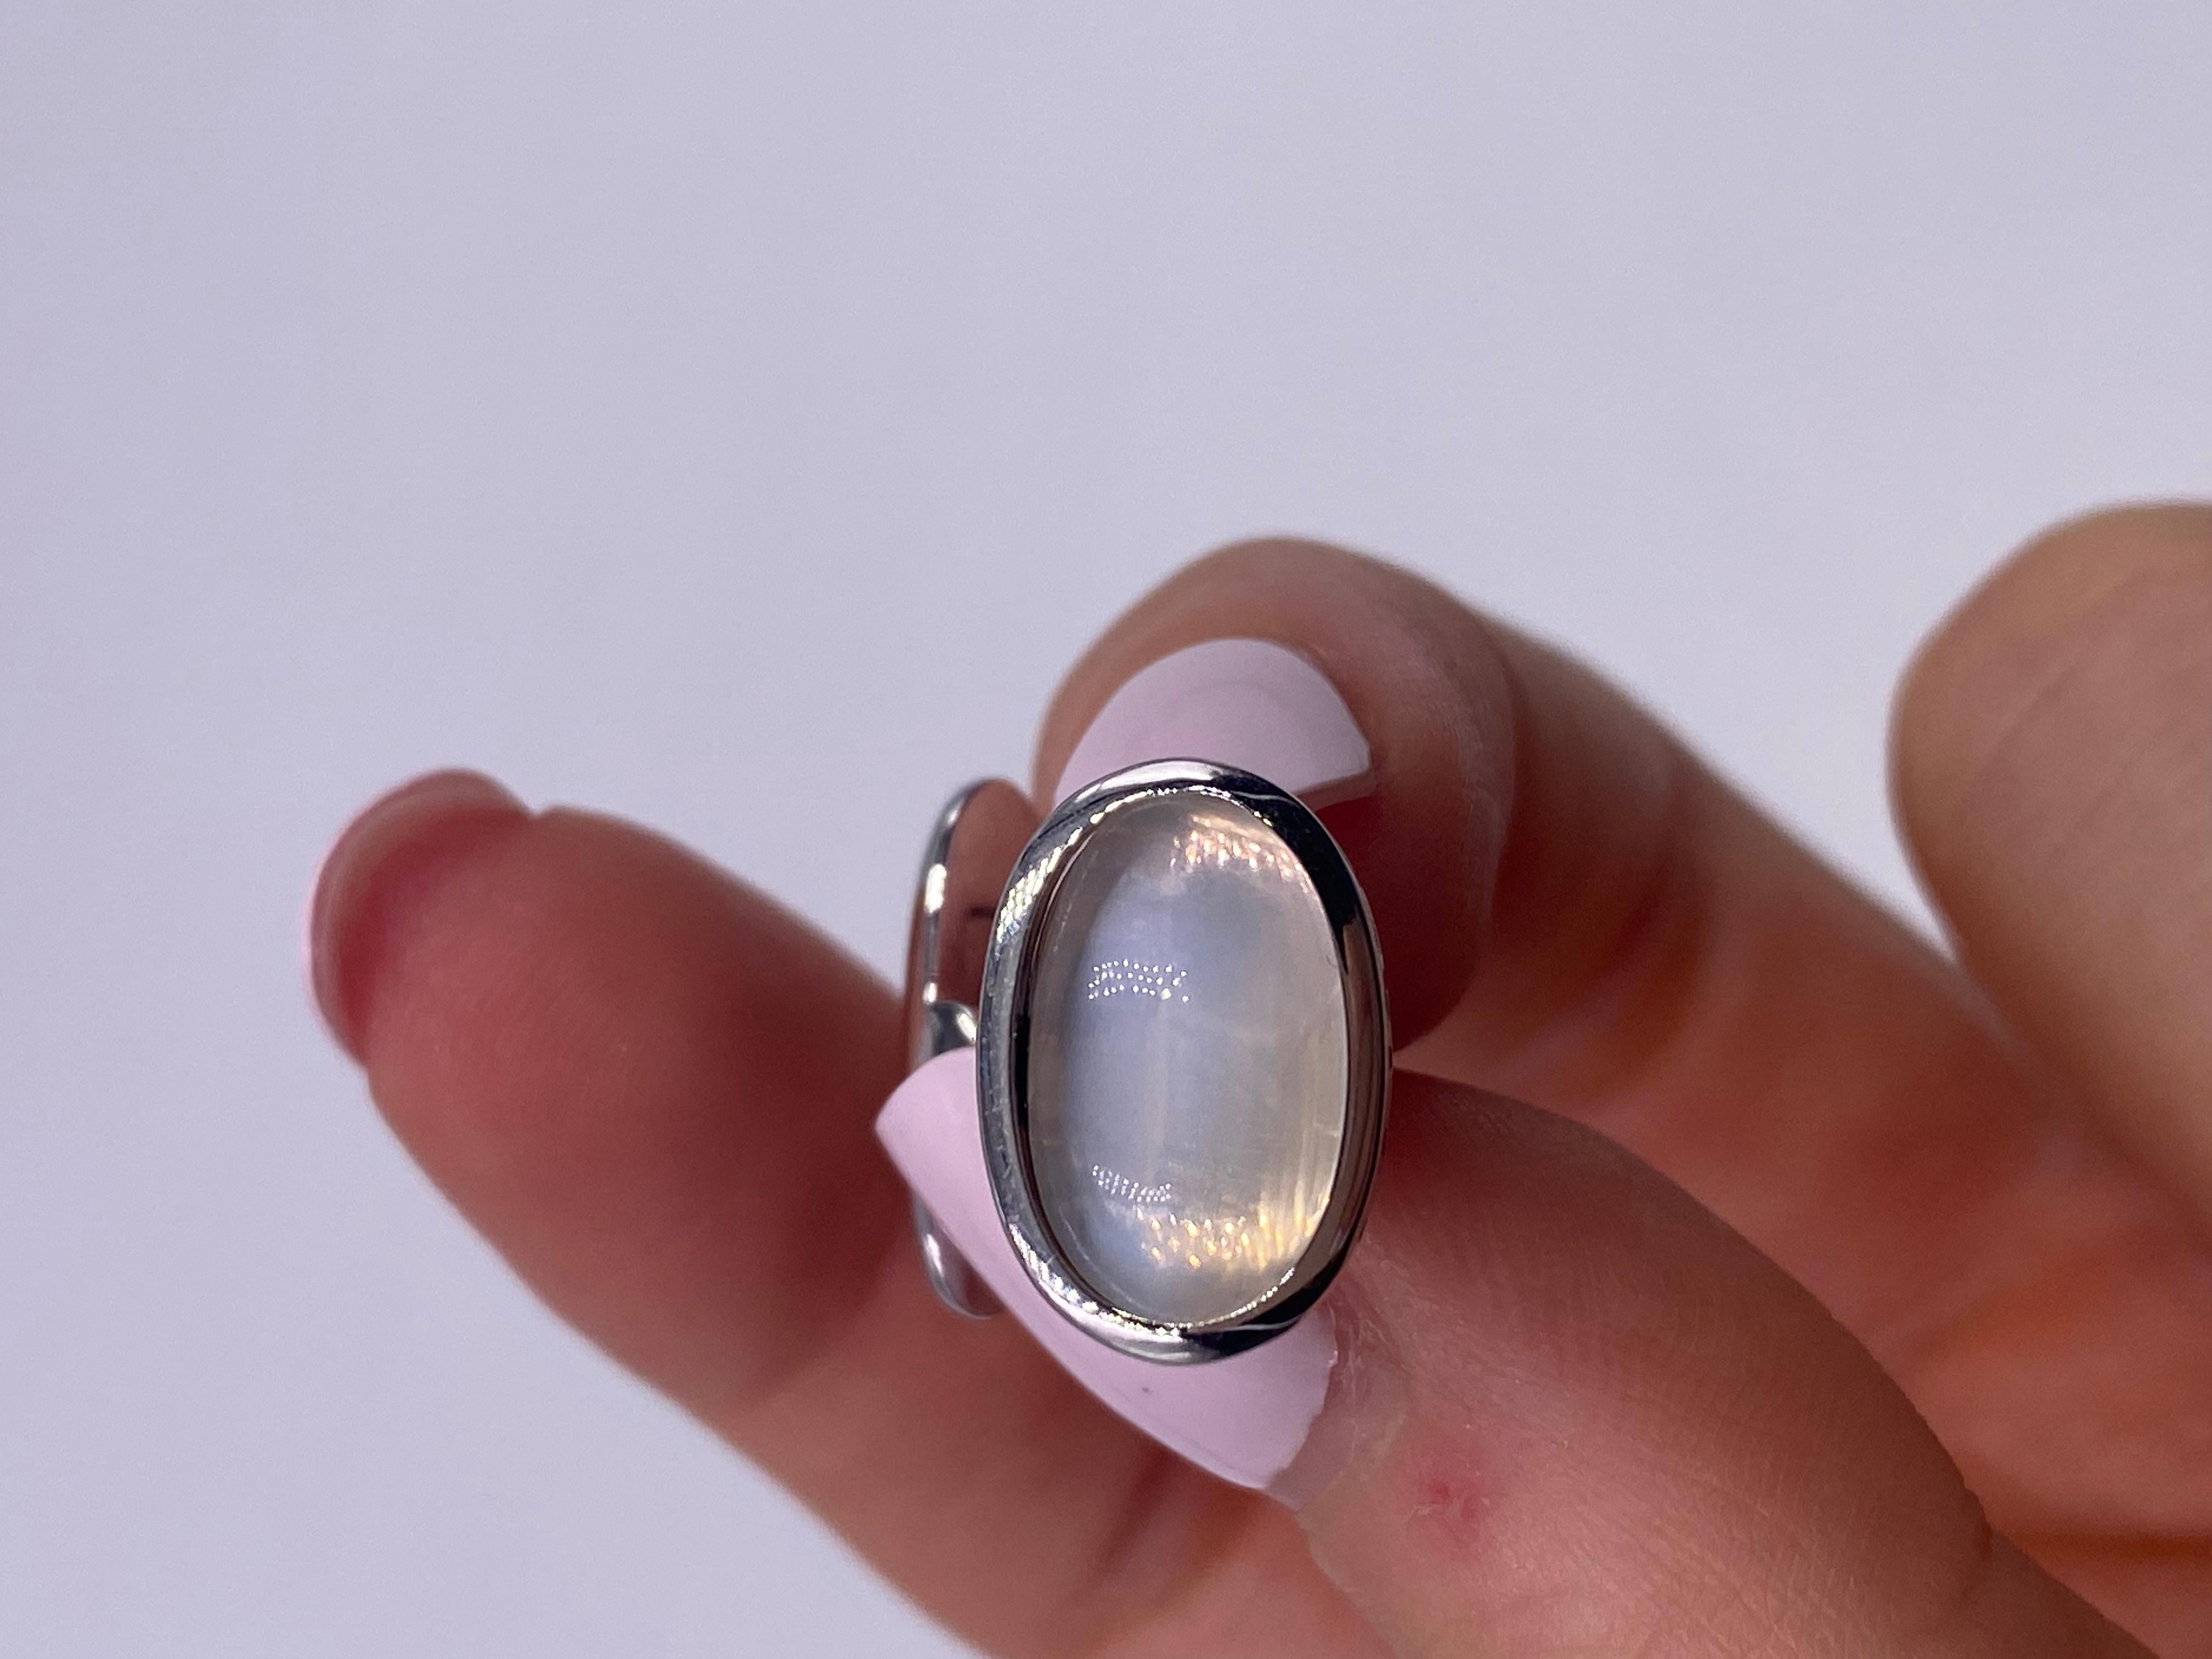 Cufflinks is an unavoidable accessory of elegant classy people. This piece of jewelry catches everybody’s eyes with breathtaking mysterious moonstone. The absolute virtue of the moonstone is its constantly iridescent color palette, which shimmers